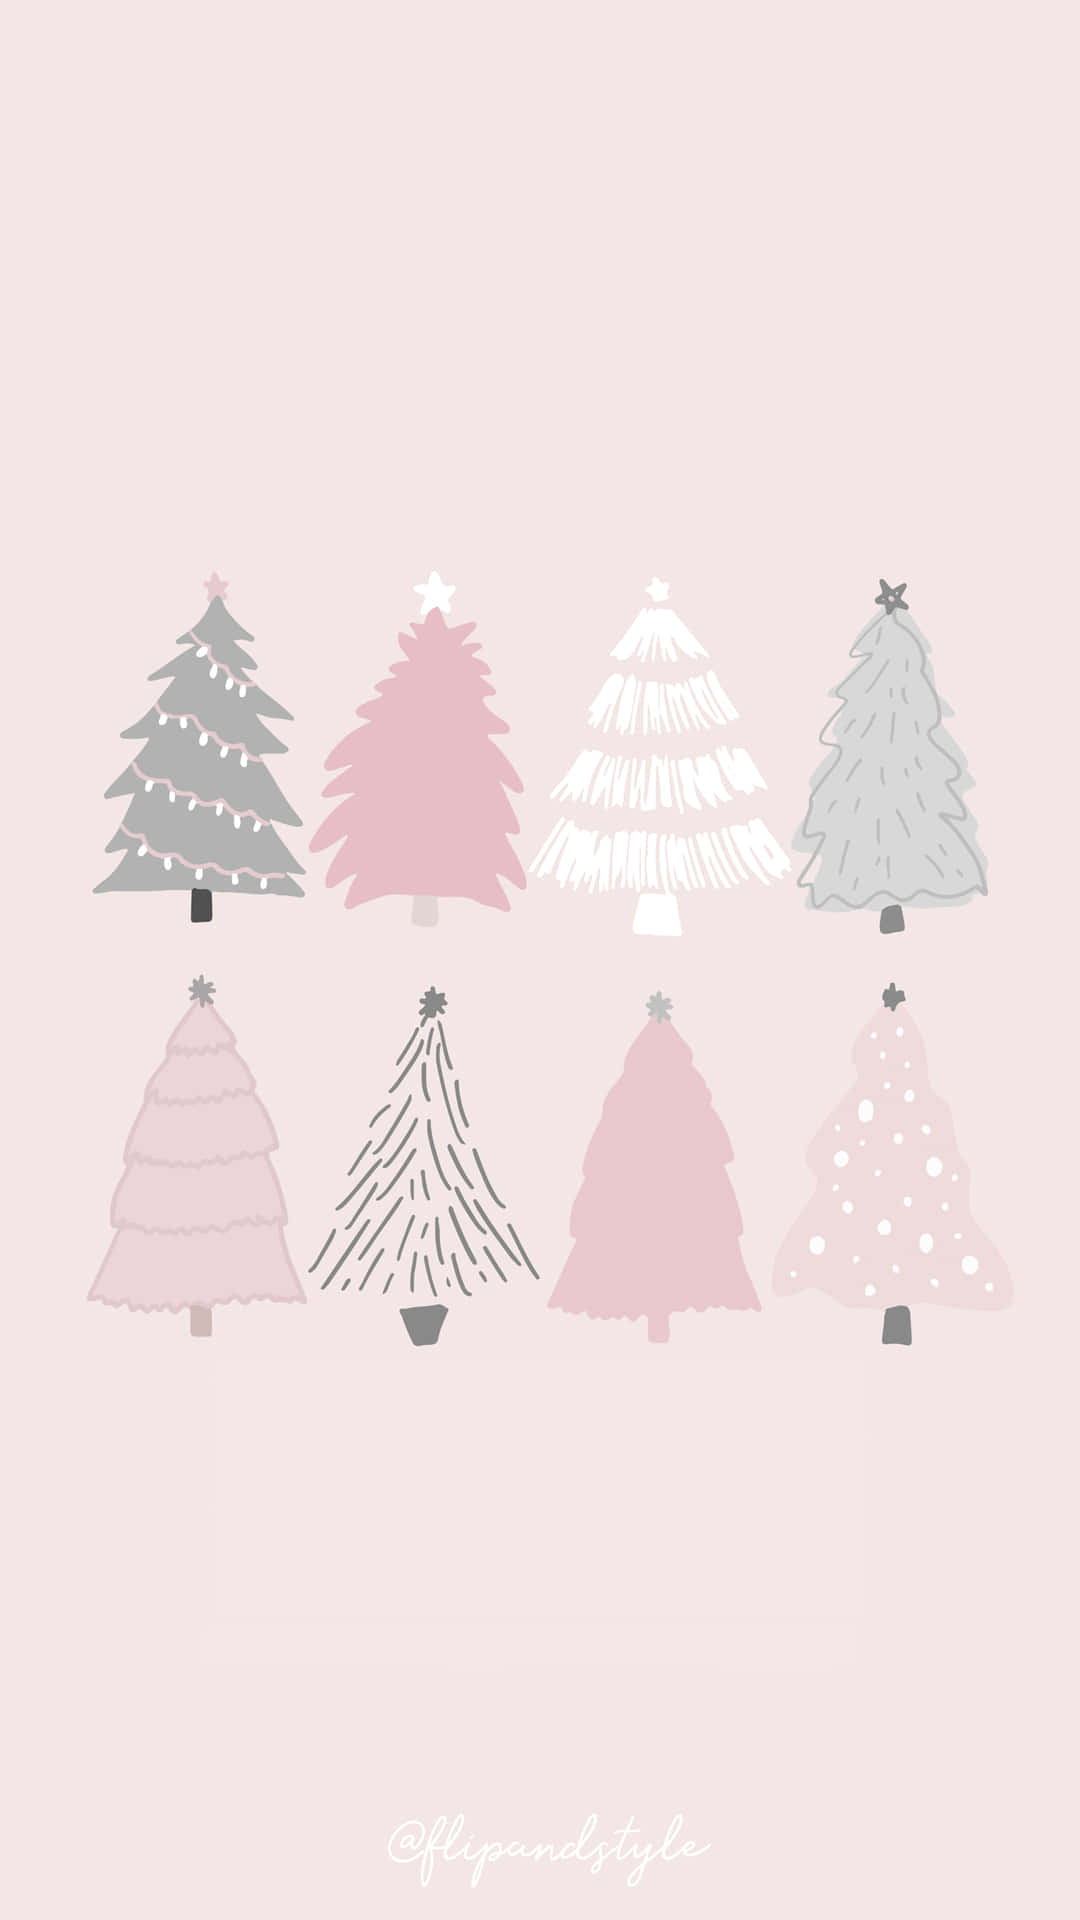 Get Ready for the Holidays with a Festive Pastel Christmas! Wallpaper